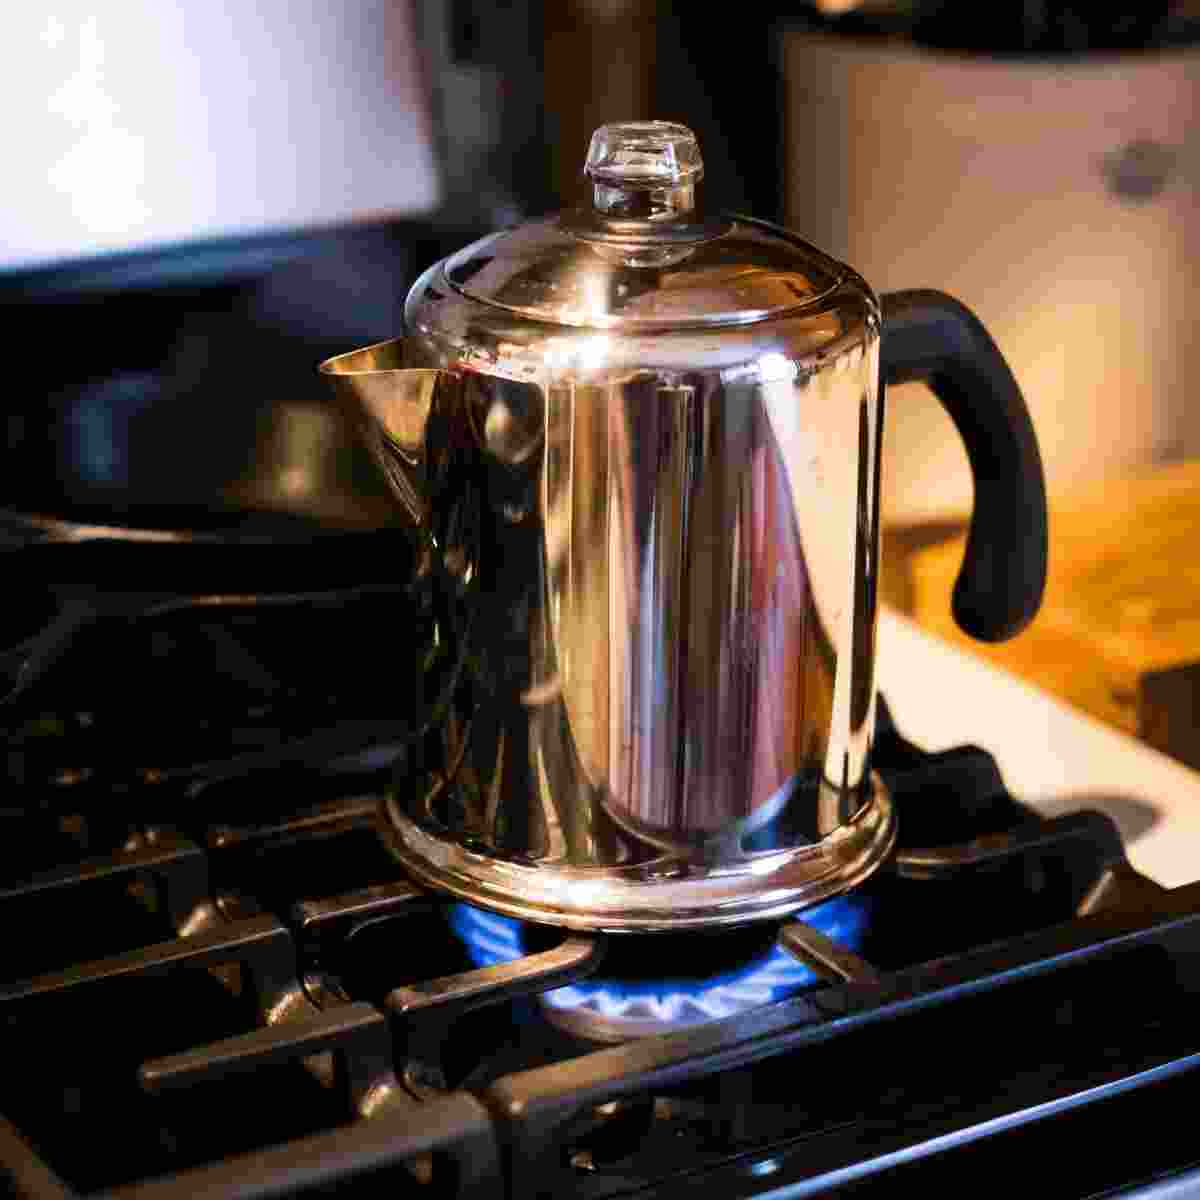 How to use a Stovetop Percolator